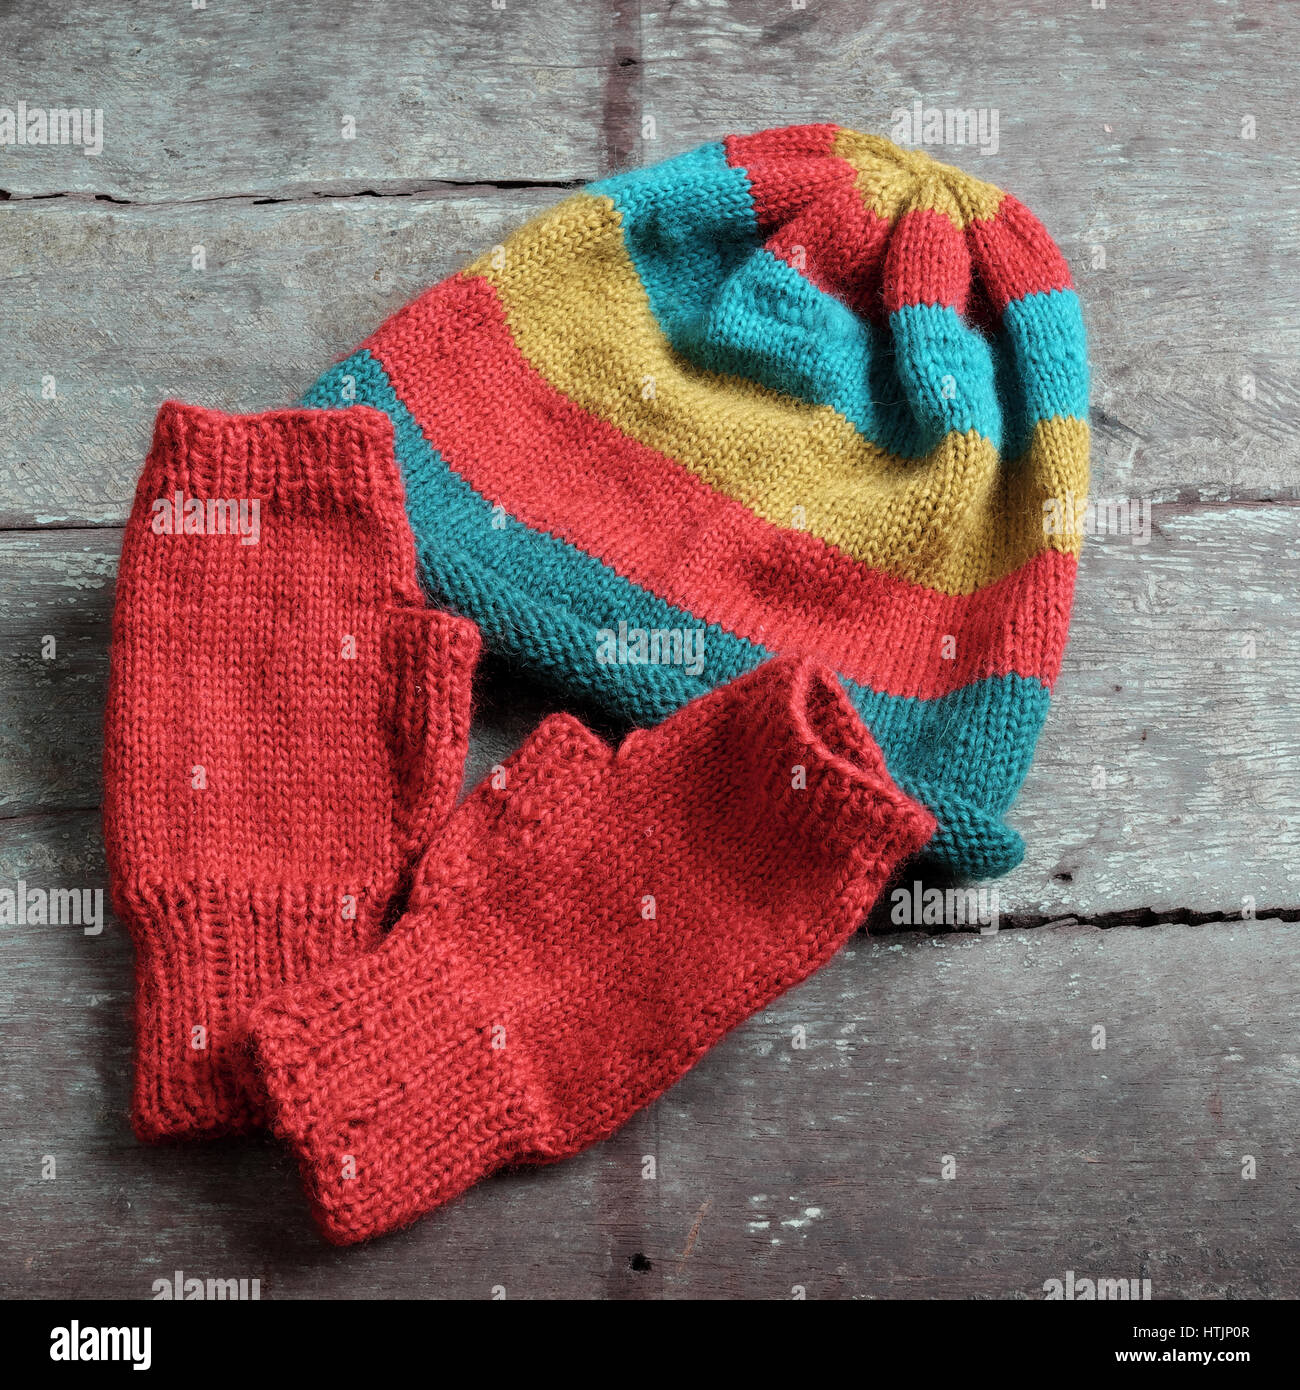 Handmade gift for winter, knitted gloves and knit hat for cold day, group of colorful yarn make warm, knit accessories is hobby activity of woman Stock Photo